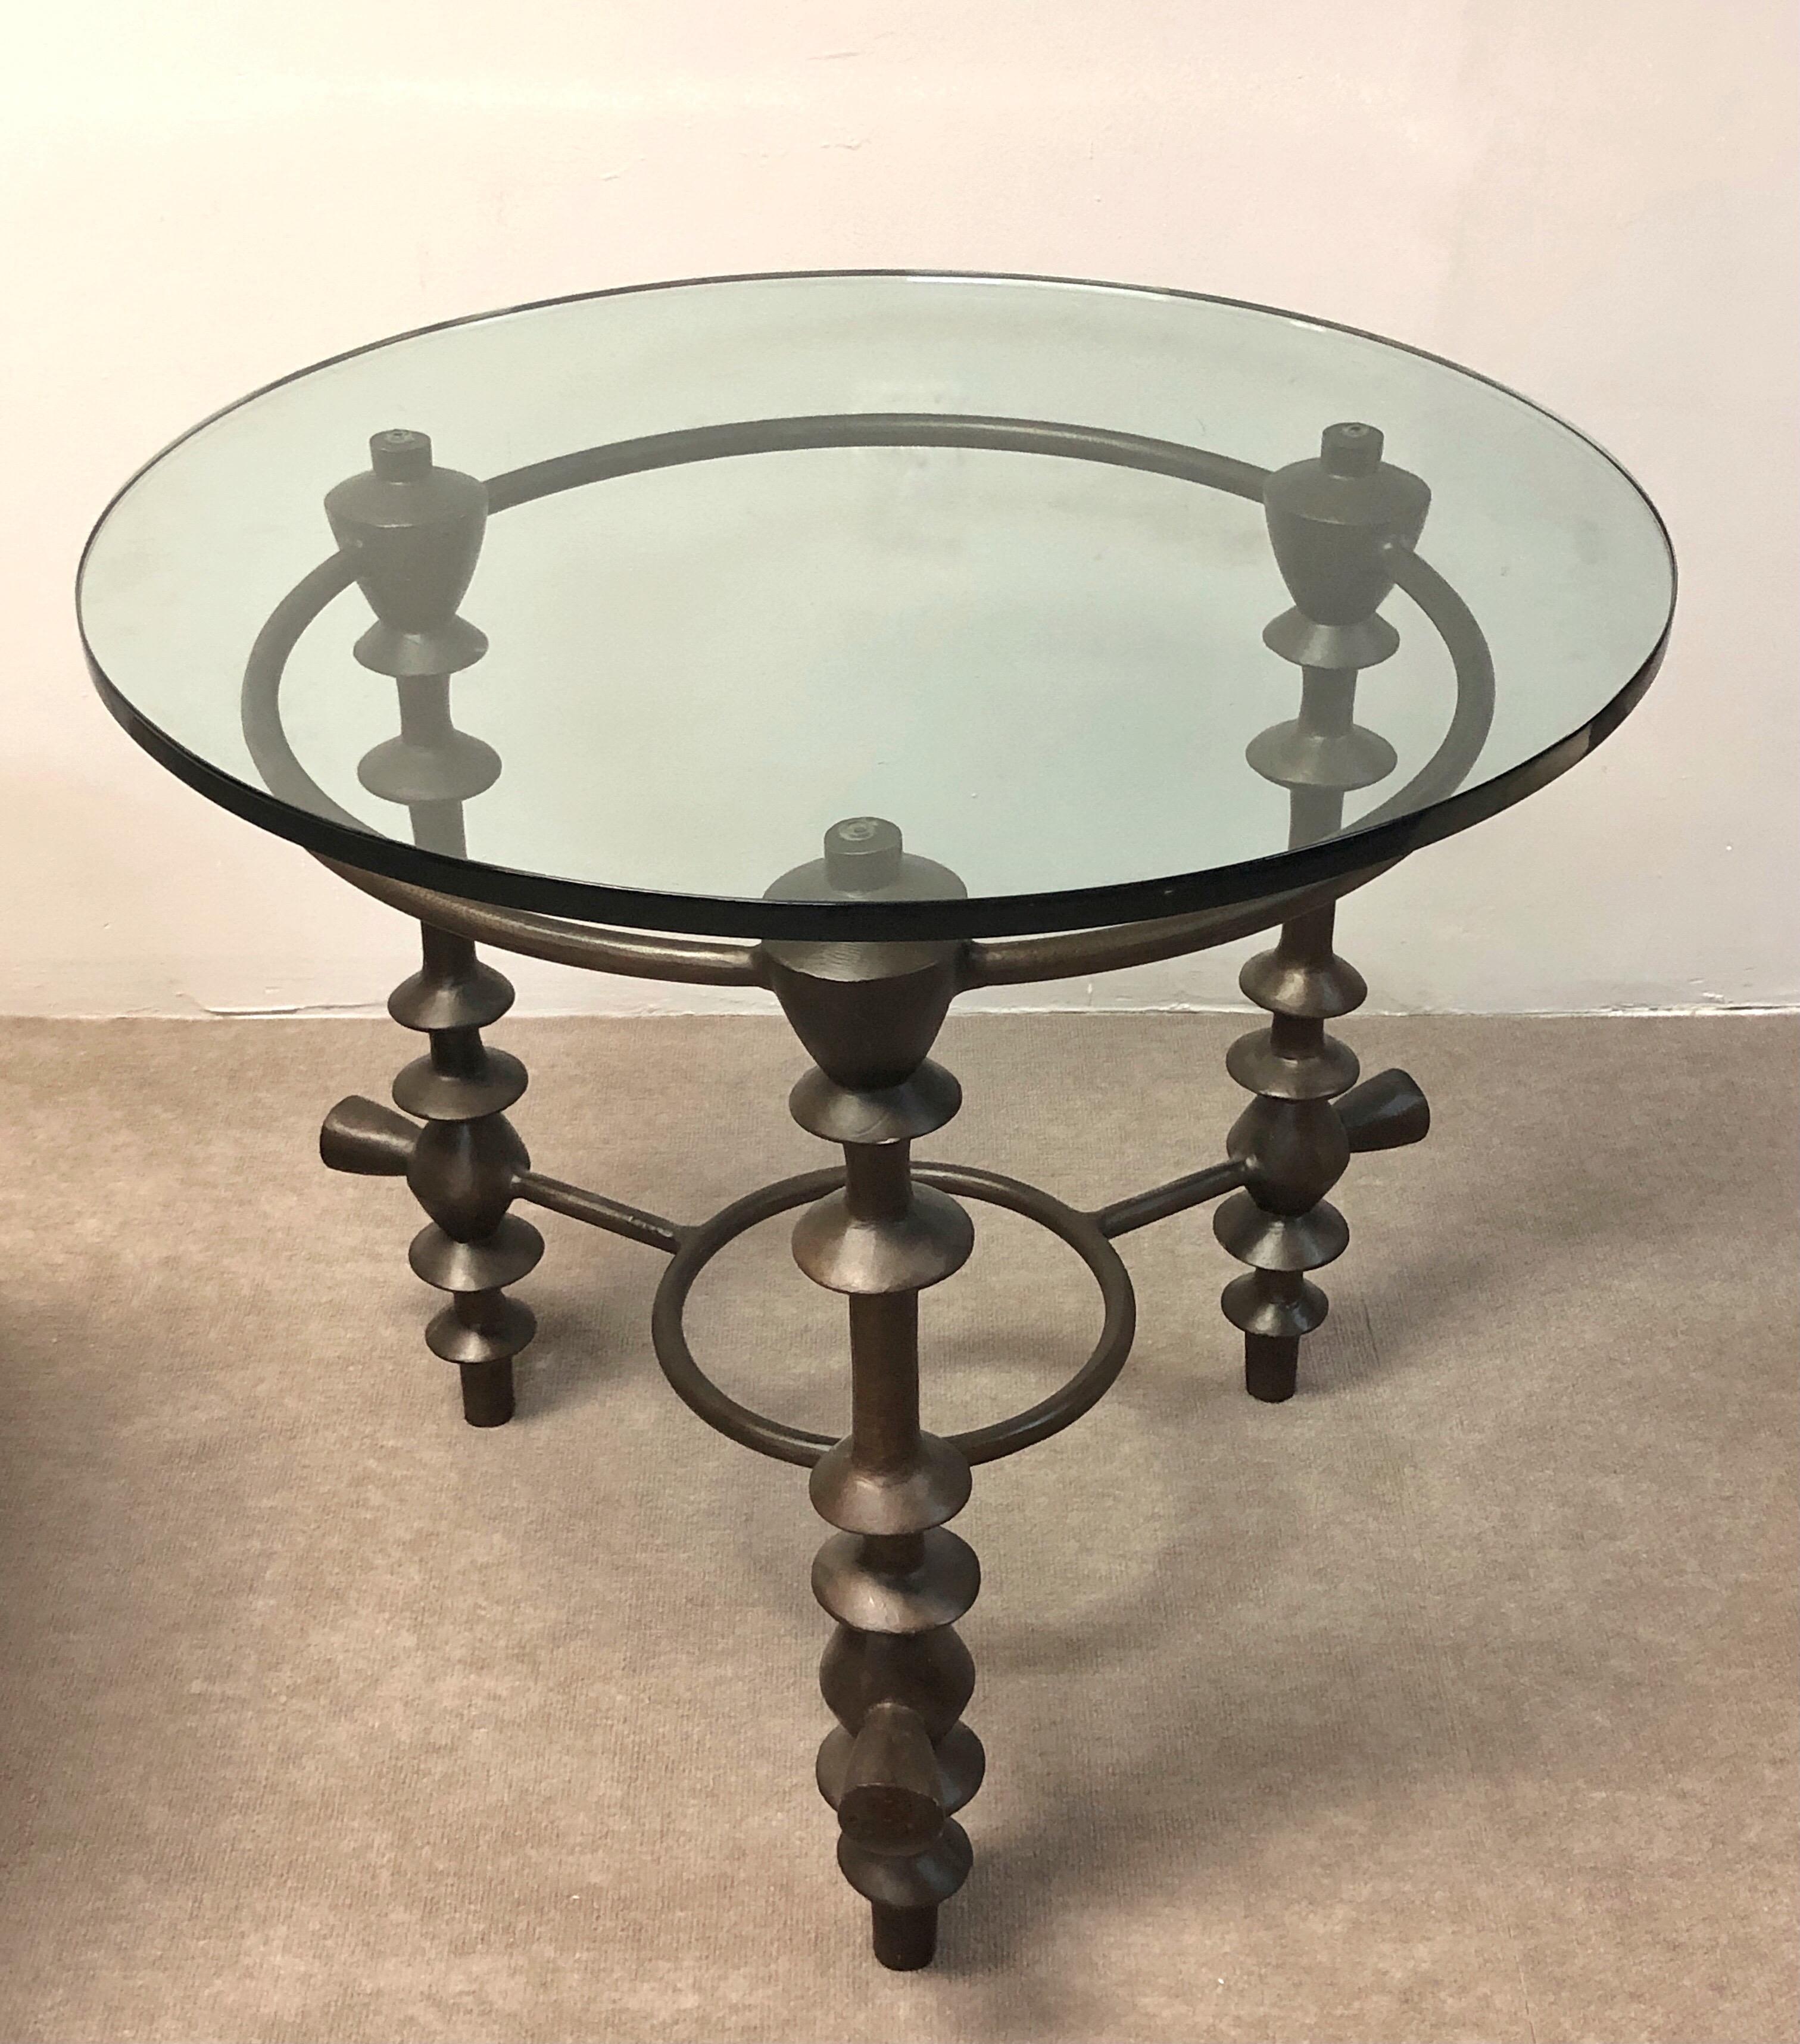 A great looking sculptural table. Solid metal with a bronze patina.